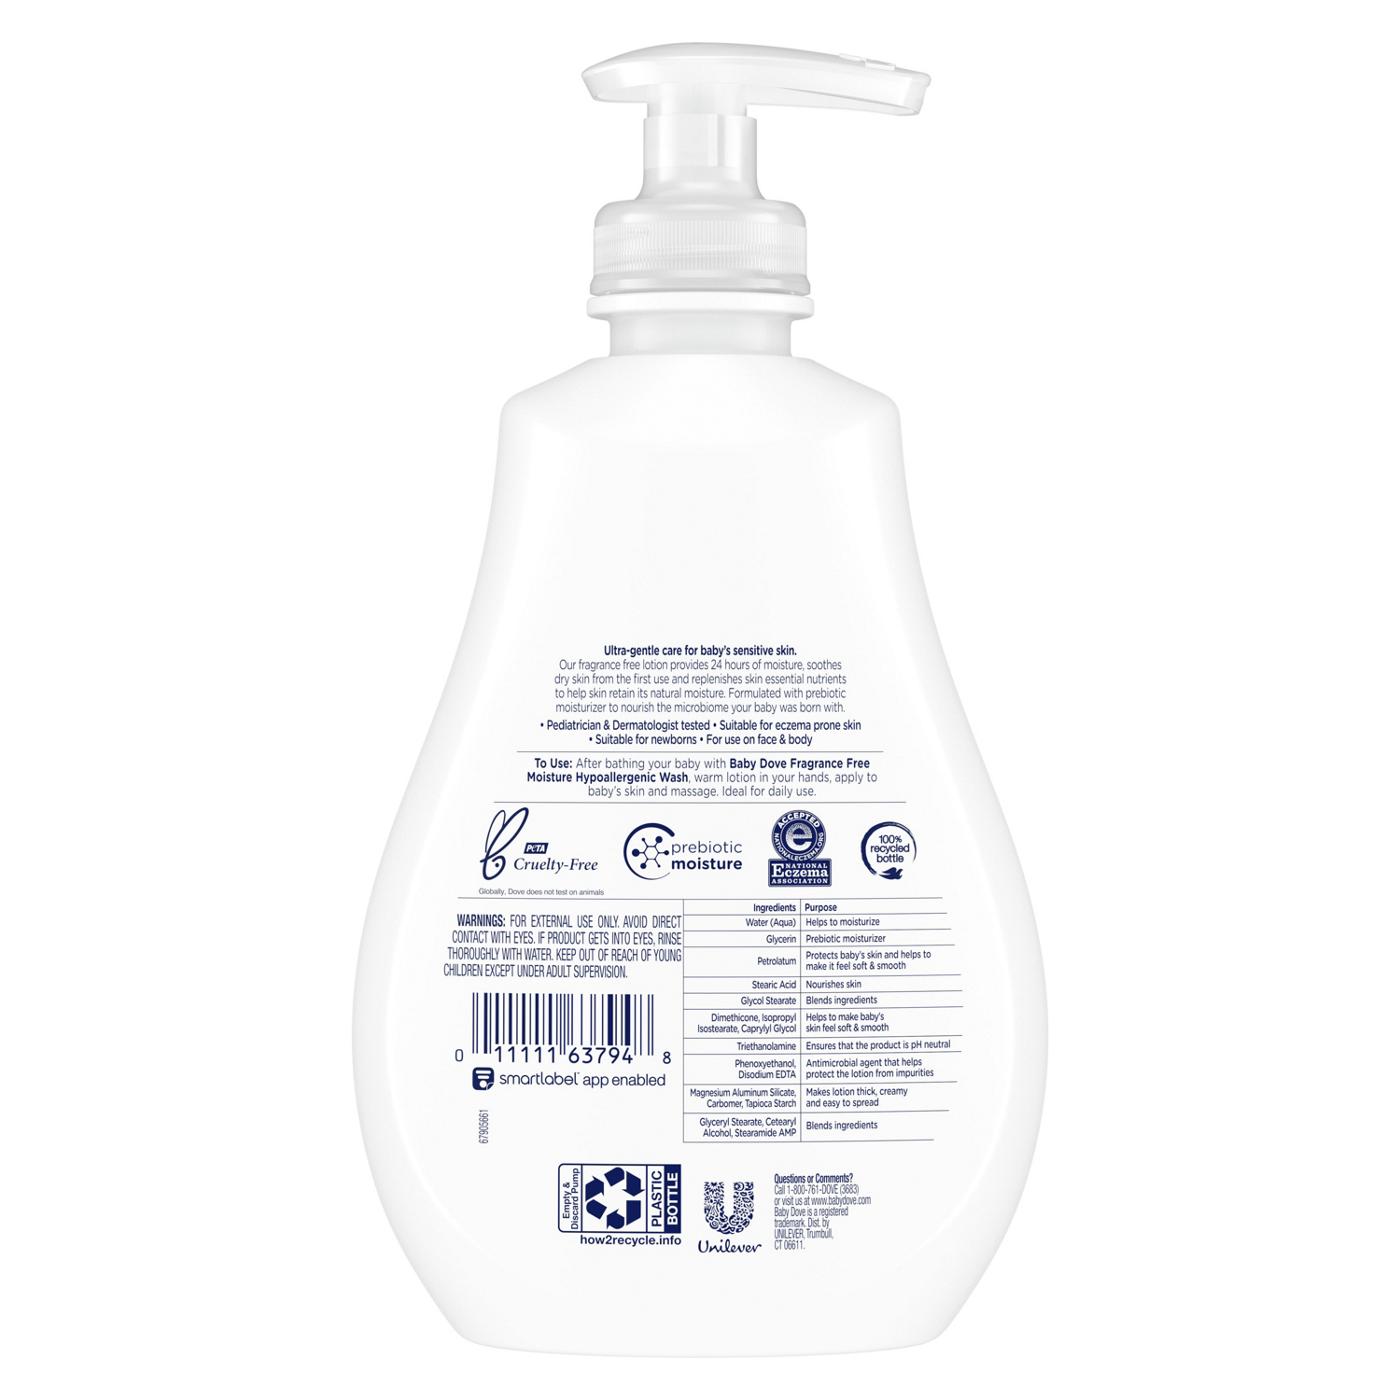 Baby Dove Sensitive Moisture Baby Lotion; image 4 of 4